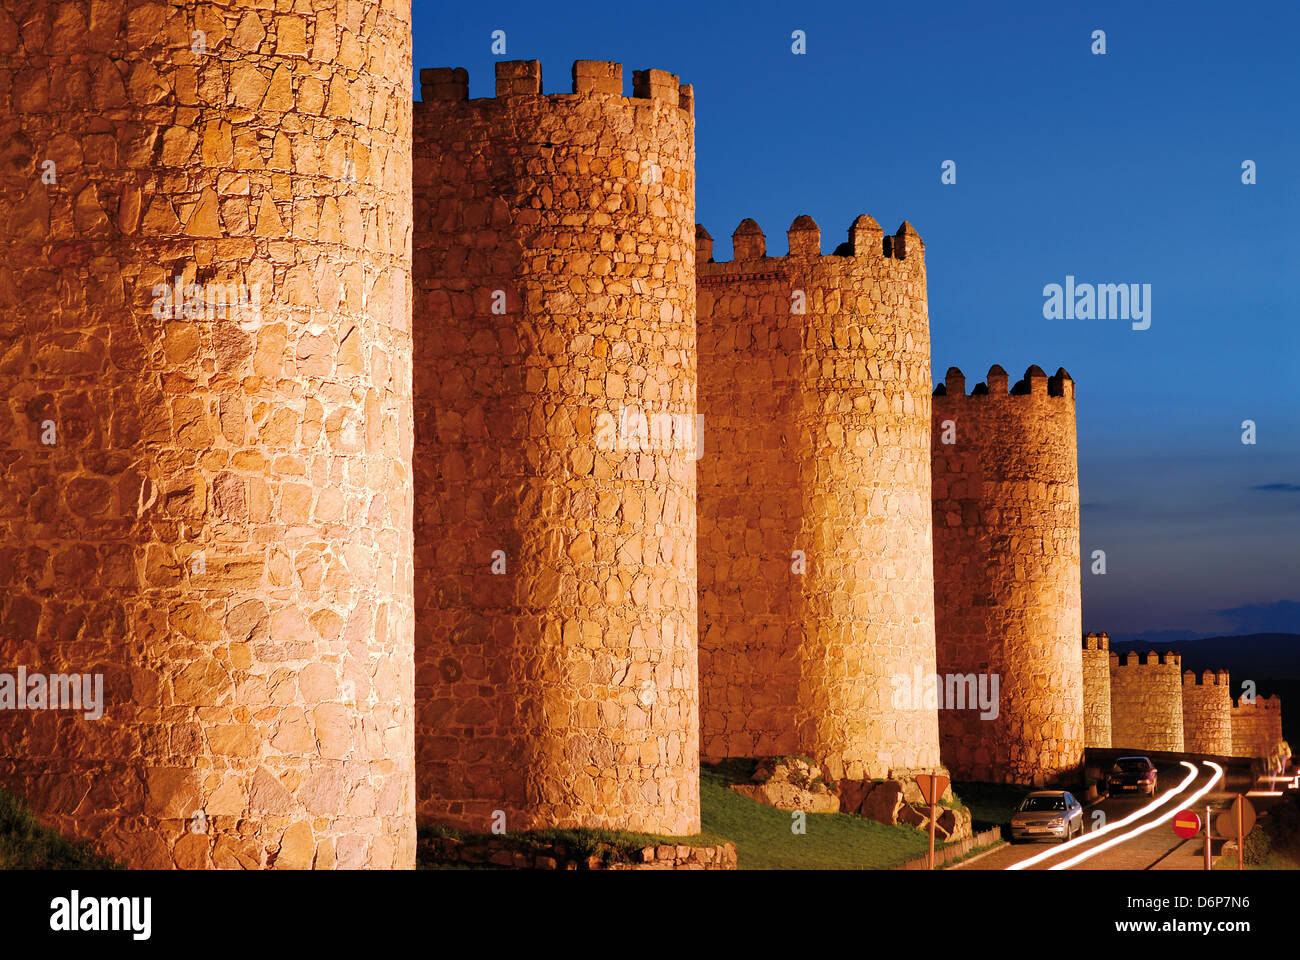 Spain: Medieval town walls of Unesco World Heritage town Ávila at night Stock Photo